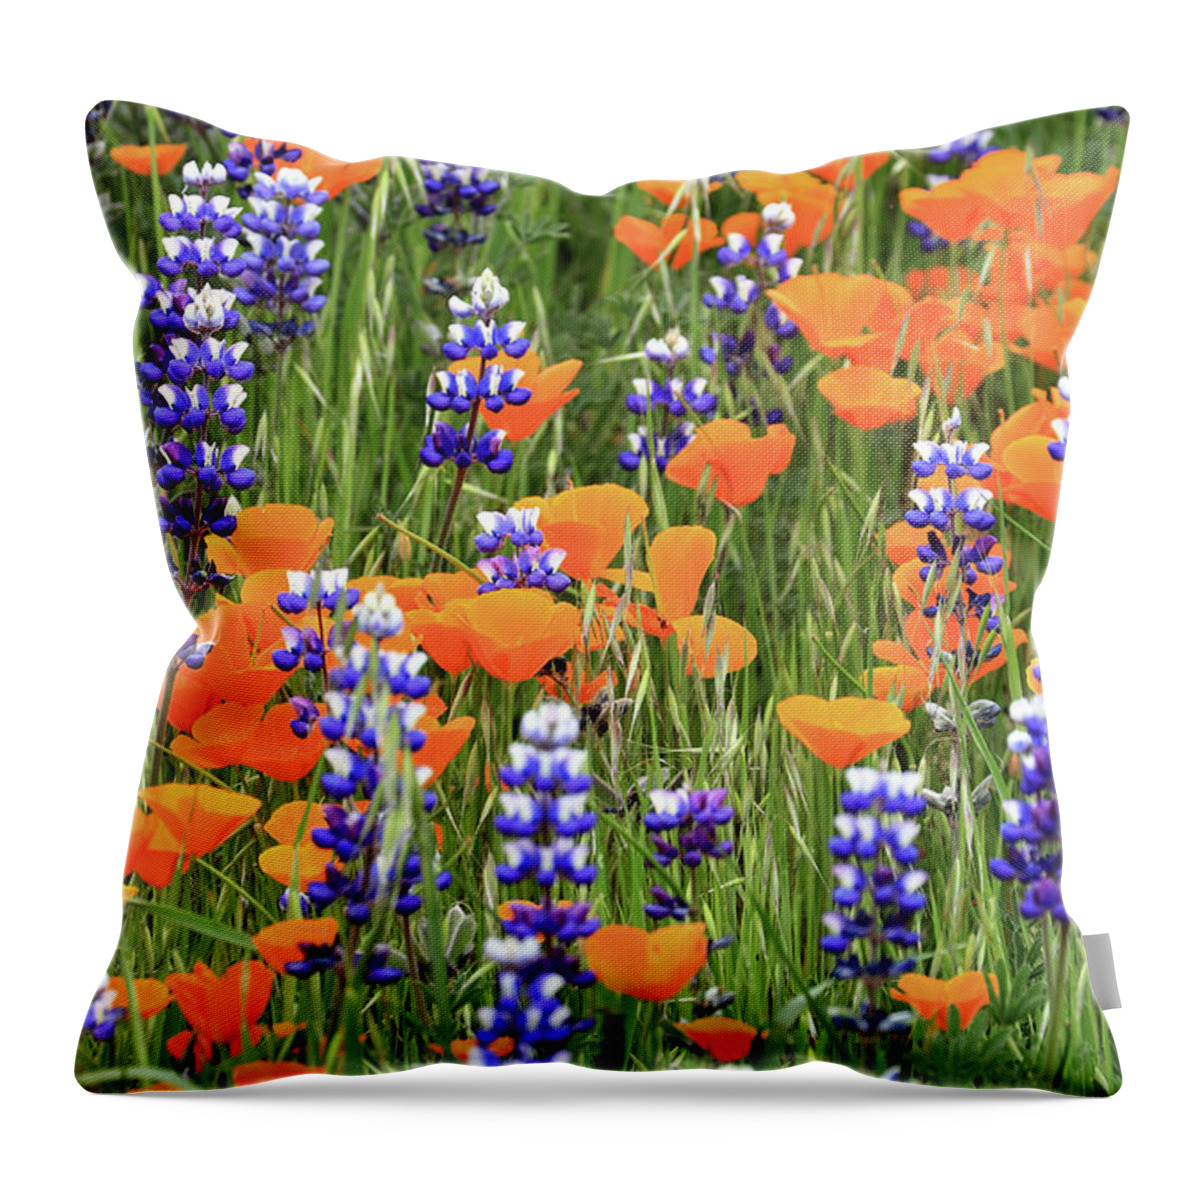 Poppy Throw Pillow featuring the photograph Poppies and Lupines by Vivian Krug Cotton